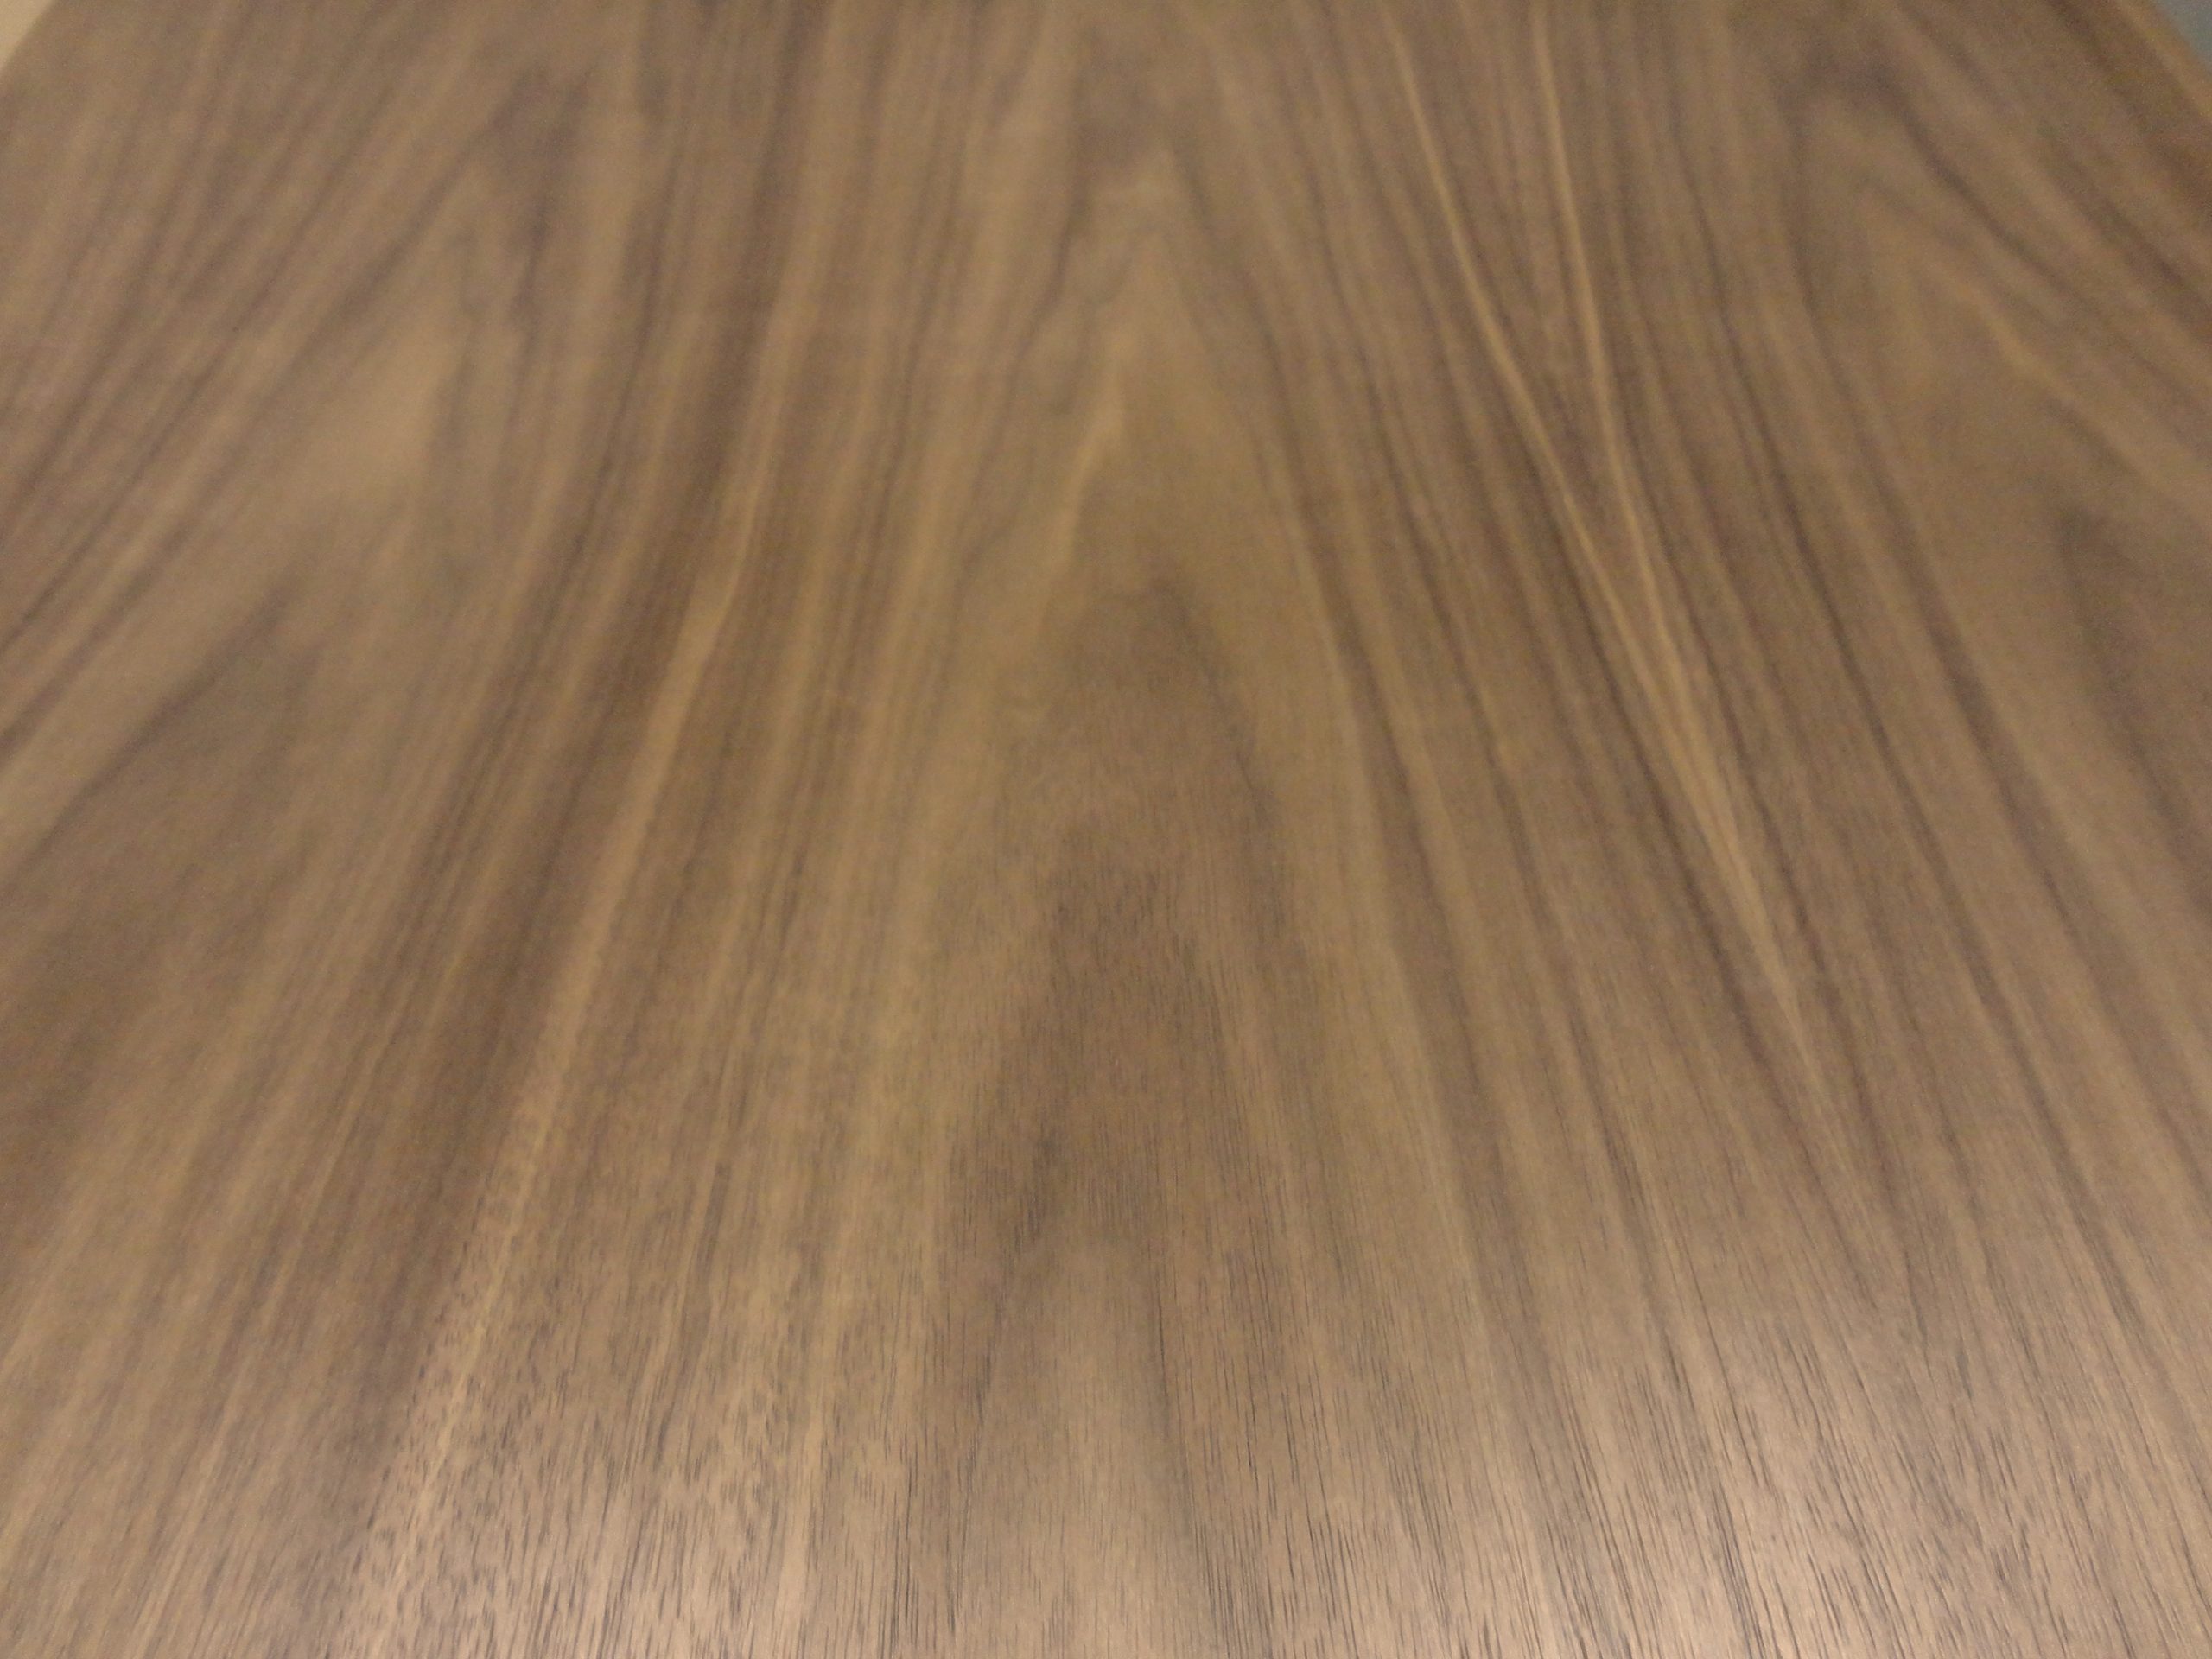 Ash wood veneer 24" x 48" with wood backer 1/25th'' thickness "A" grade quality 